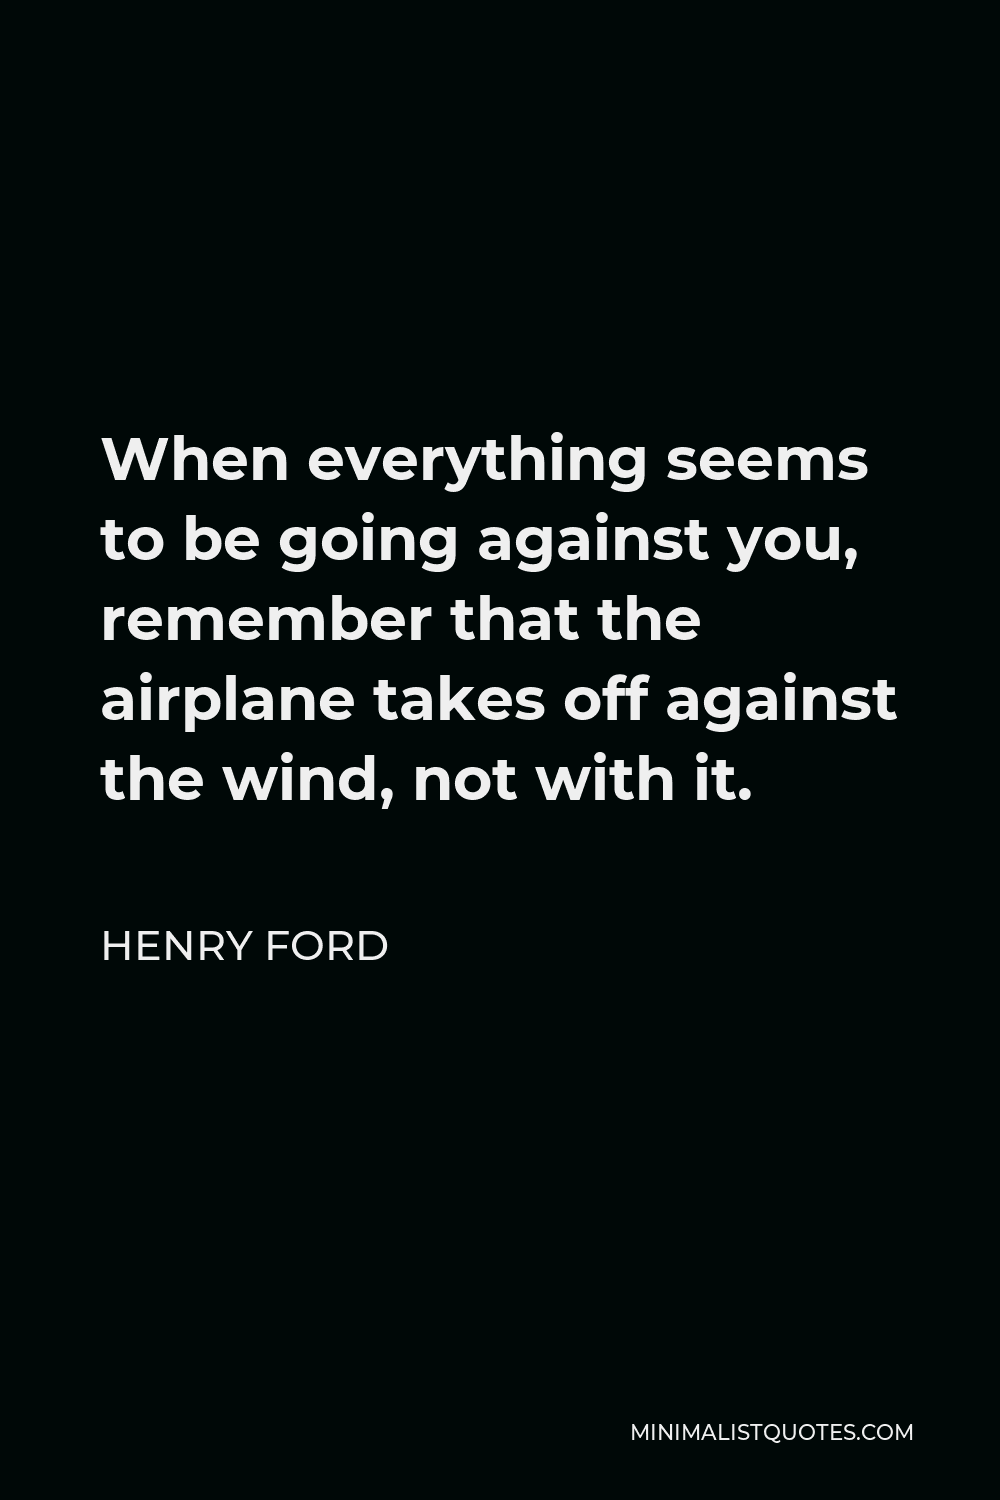 Henry Ford Quote When Everything Seems To Be Going Against You Remember That The Airplane Takes Off Against The Wind Not With It